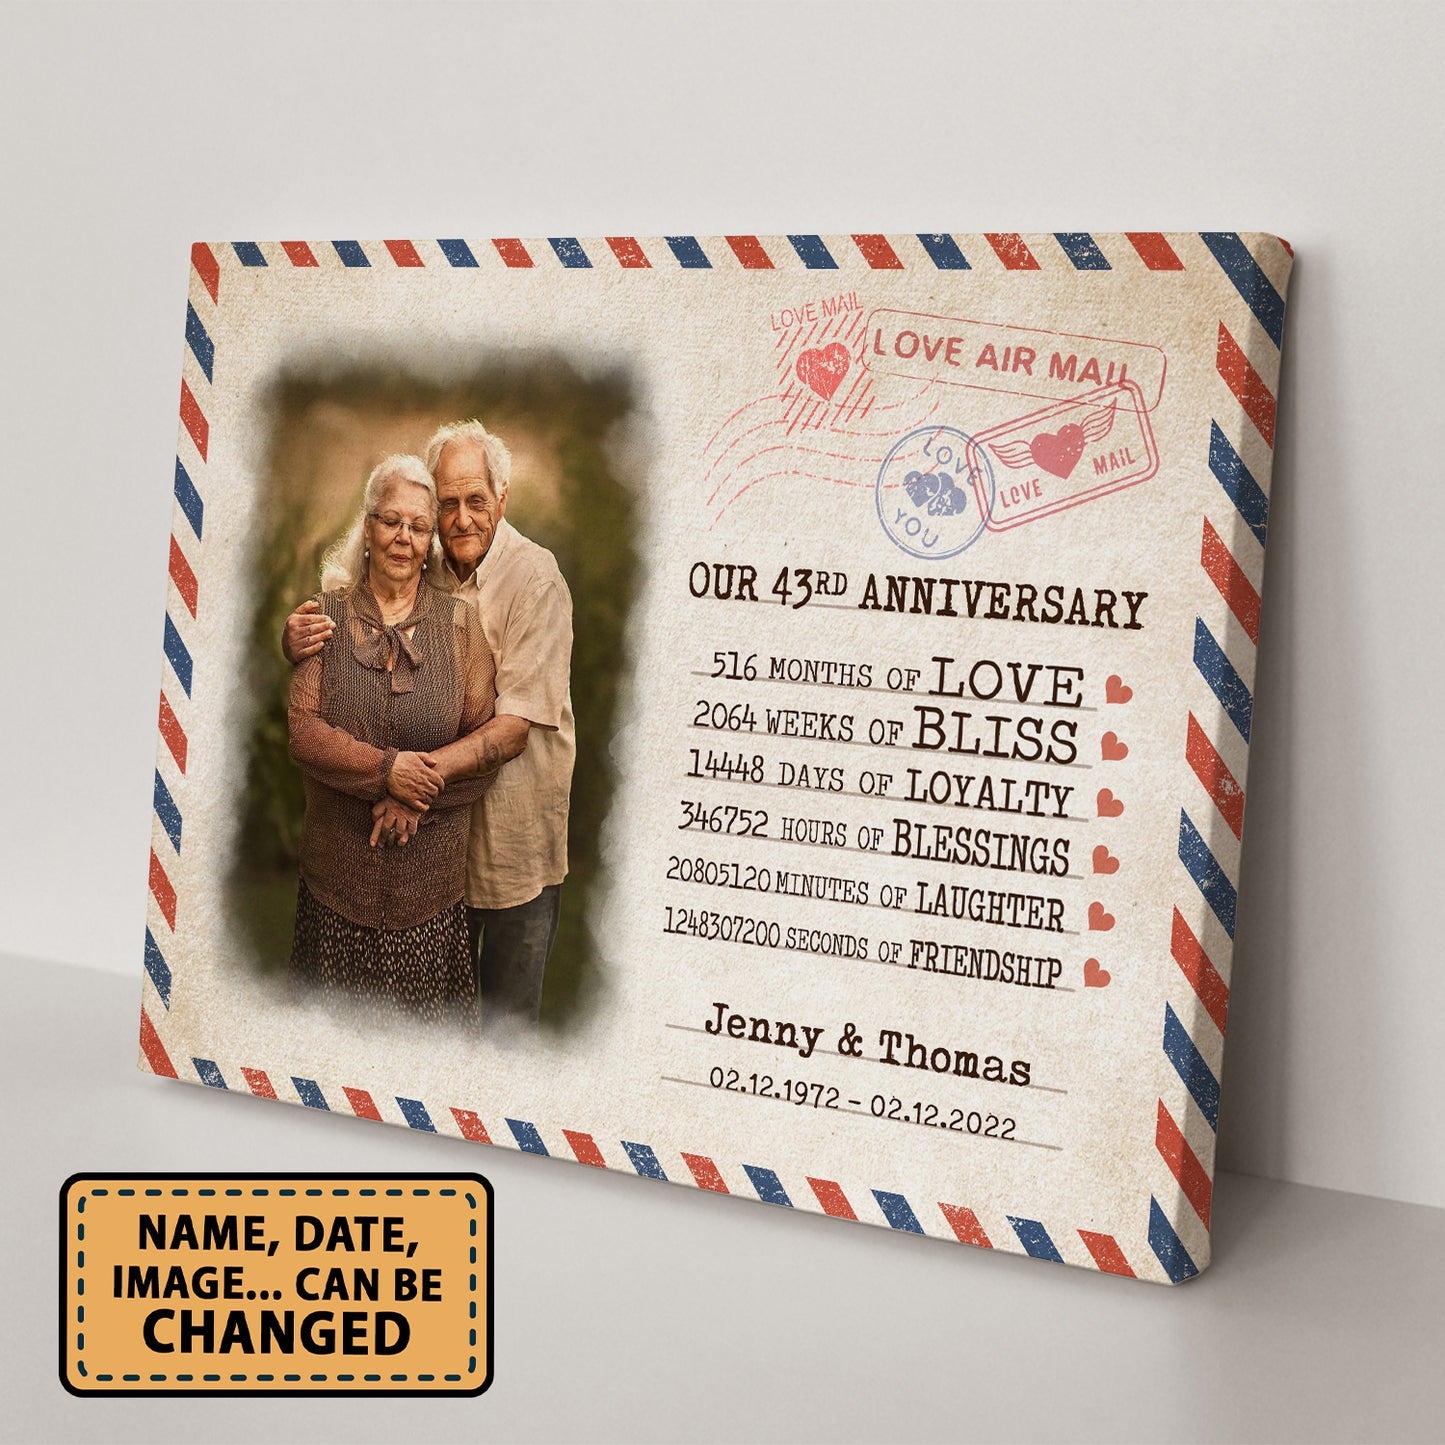 Our 43rd Anniversary Letter Valentine Gift Personalized Canvas